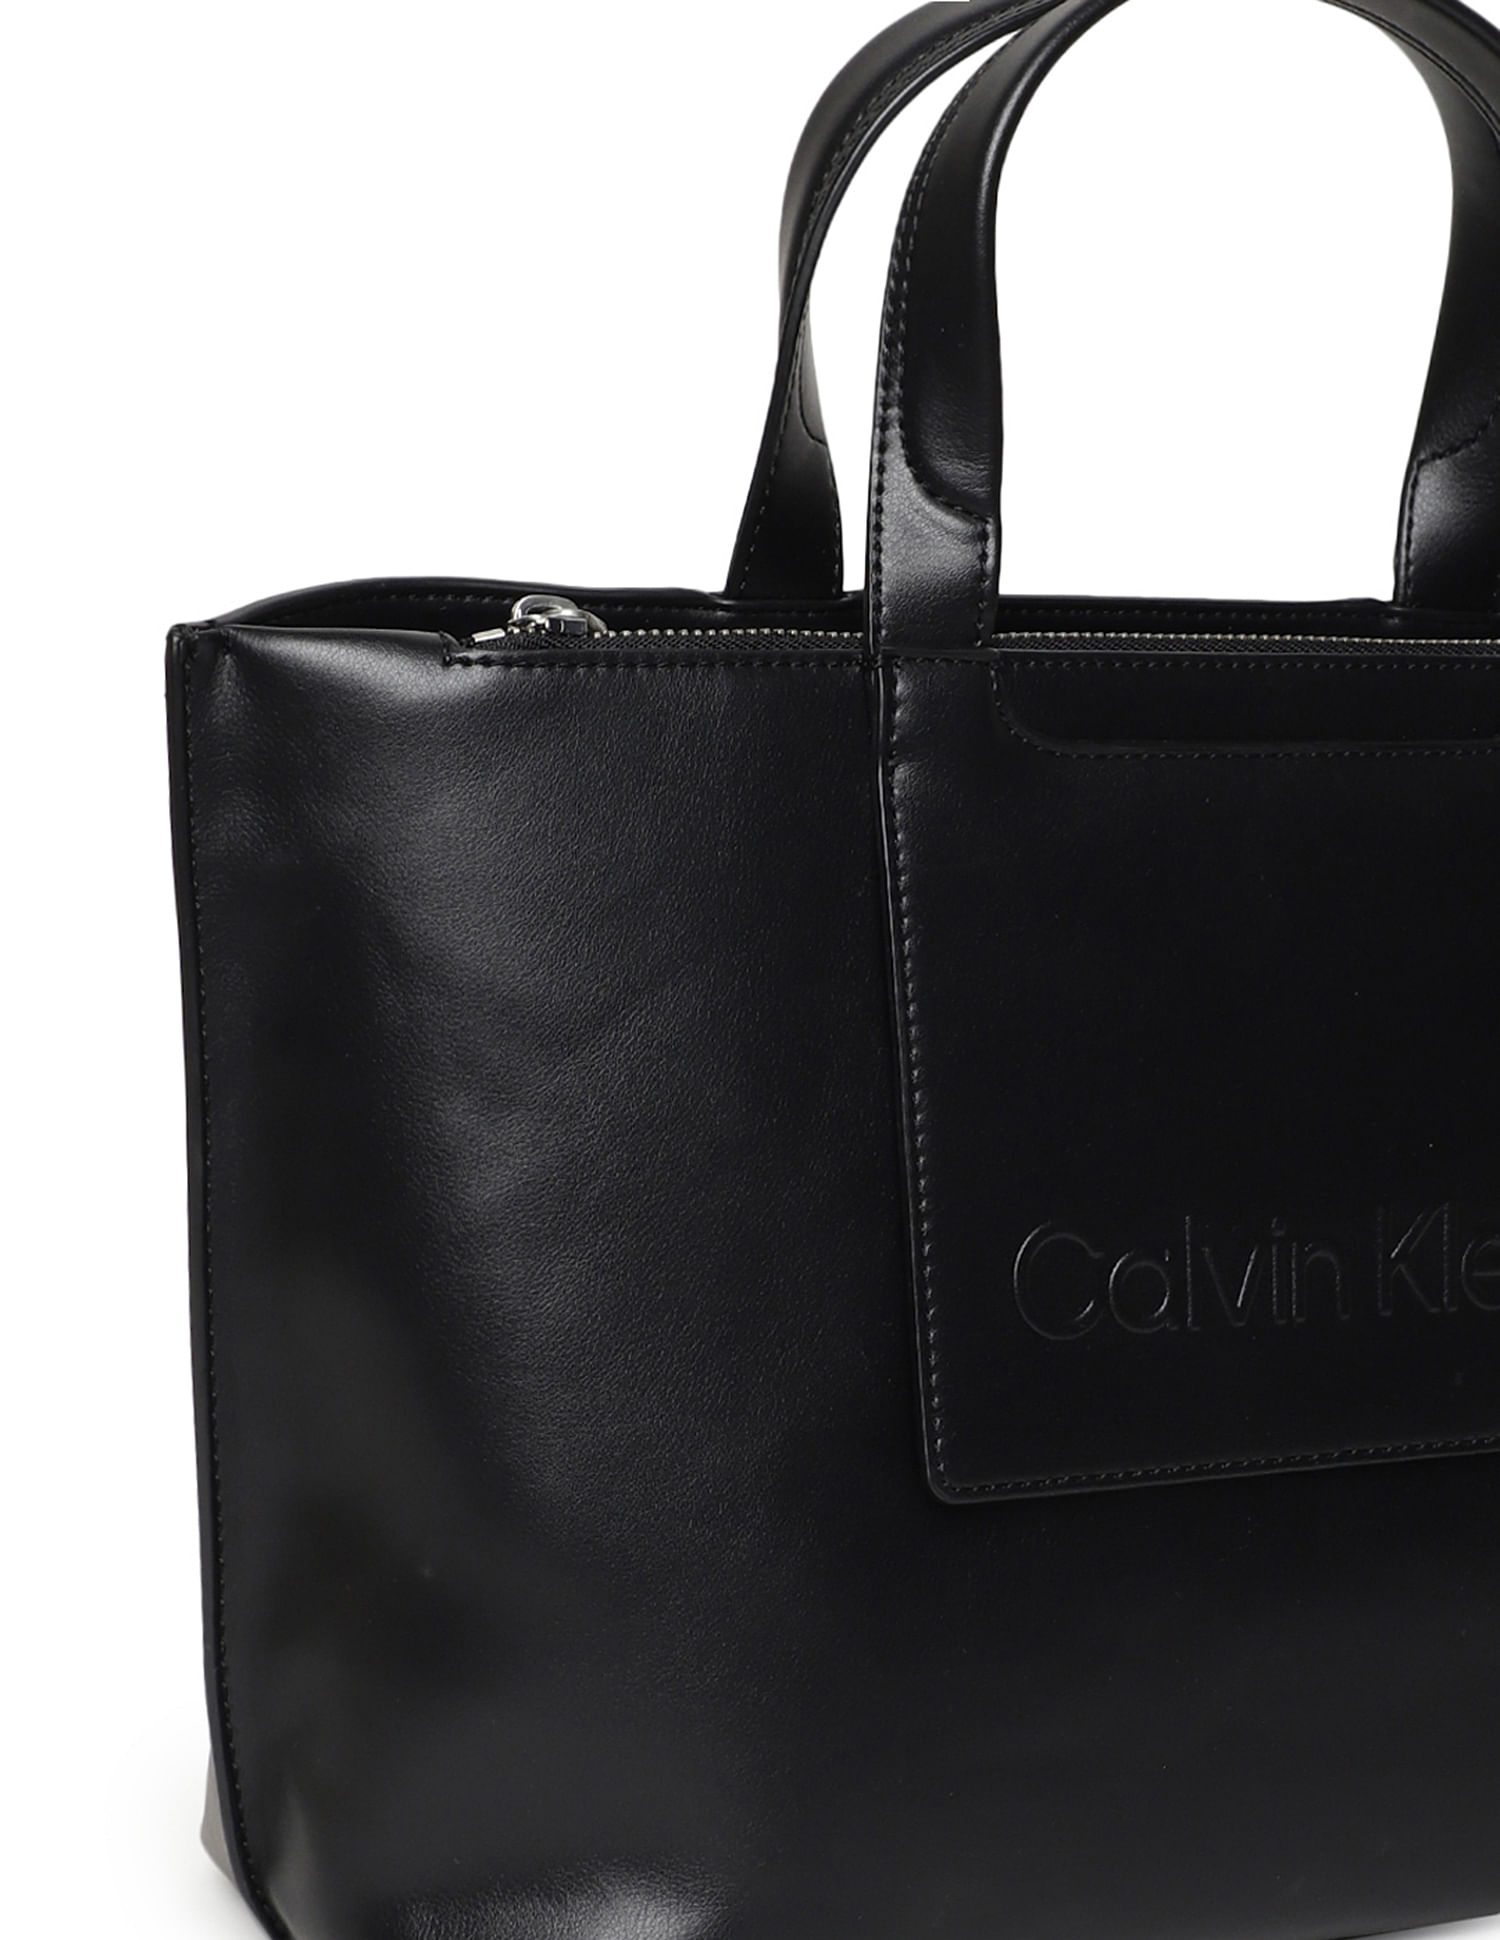 ❤️Calvin Klein Quilted Black Leather Shoulder Bag/Purse | Leather shoulder  bag, Shoulder bag, Purses and bags